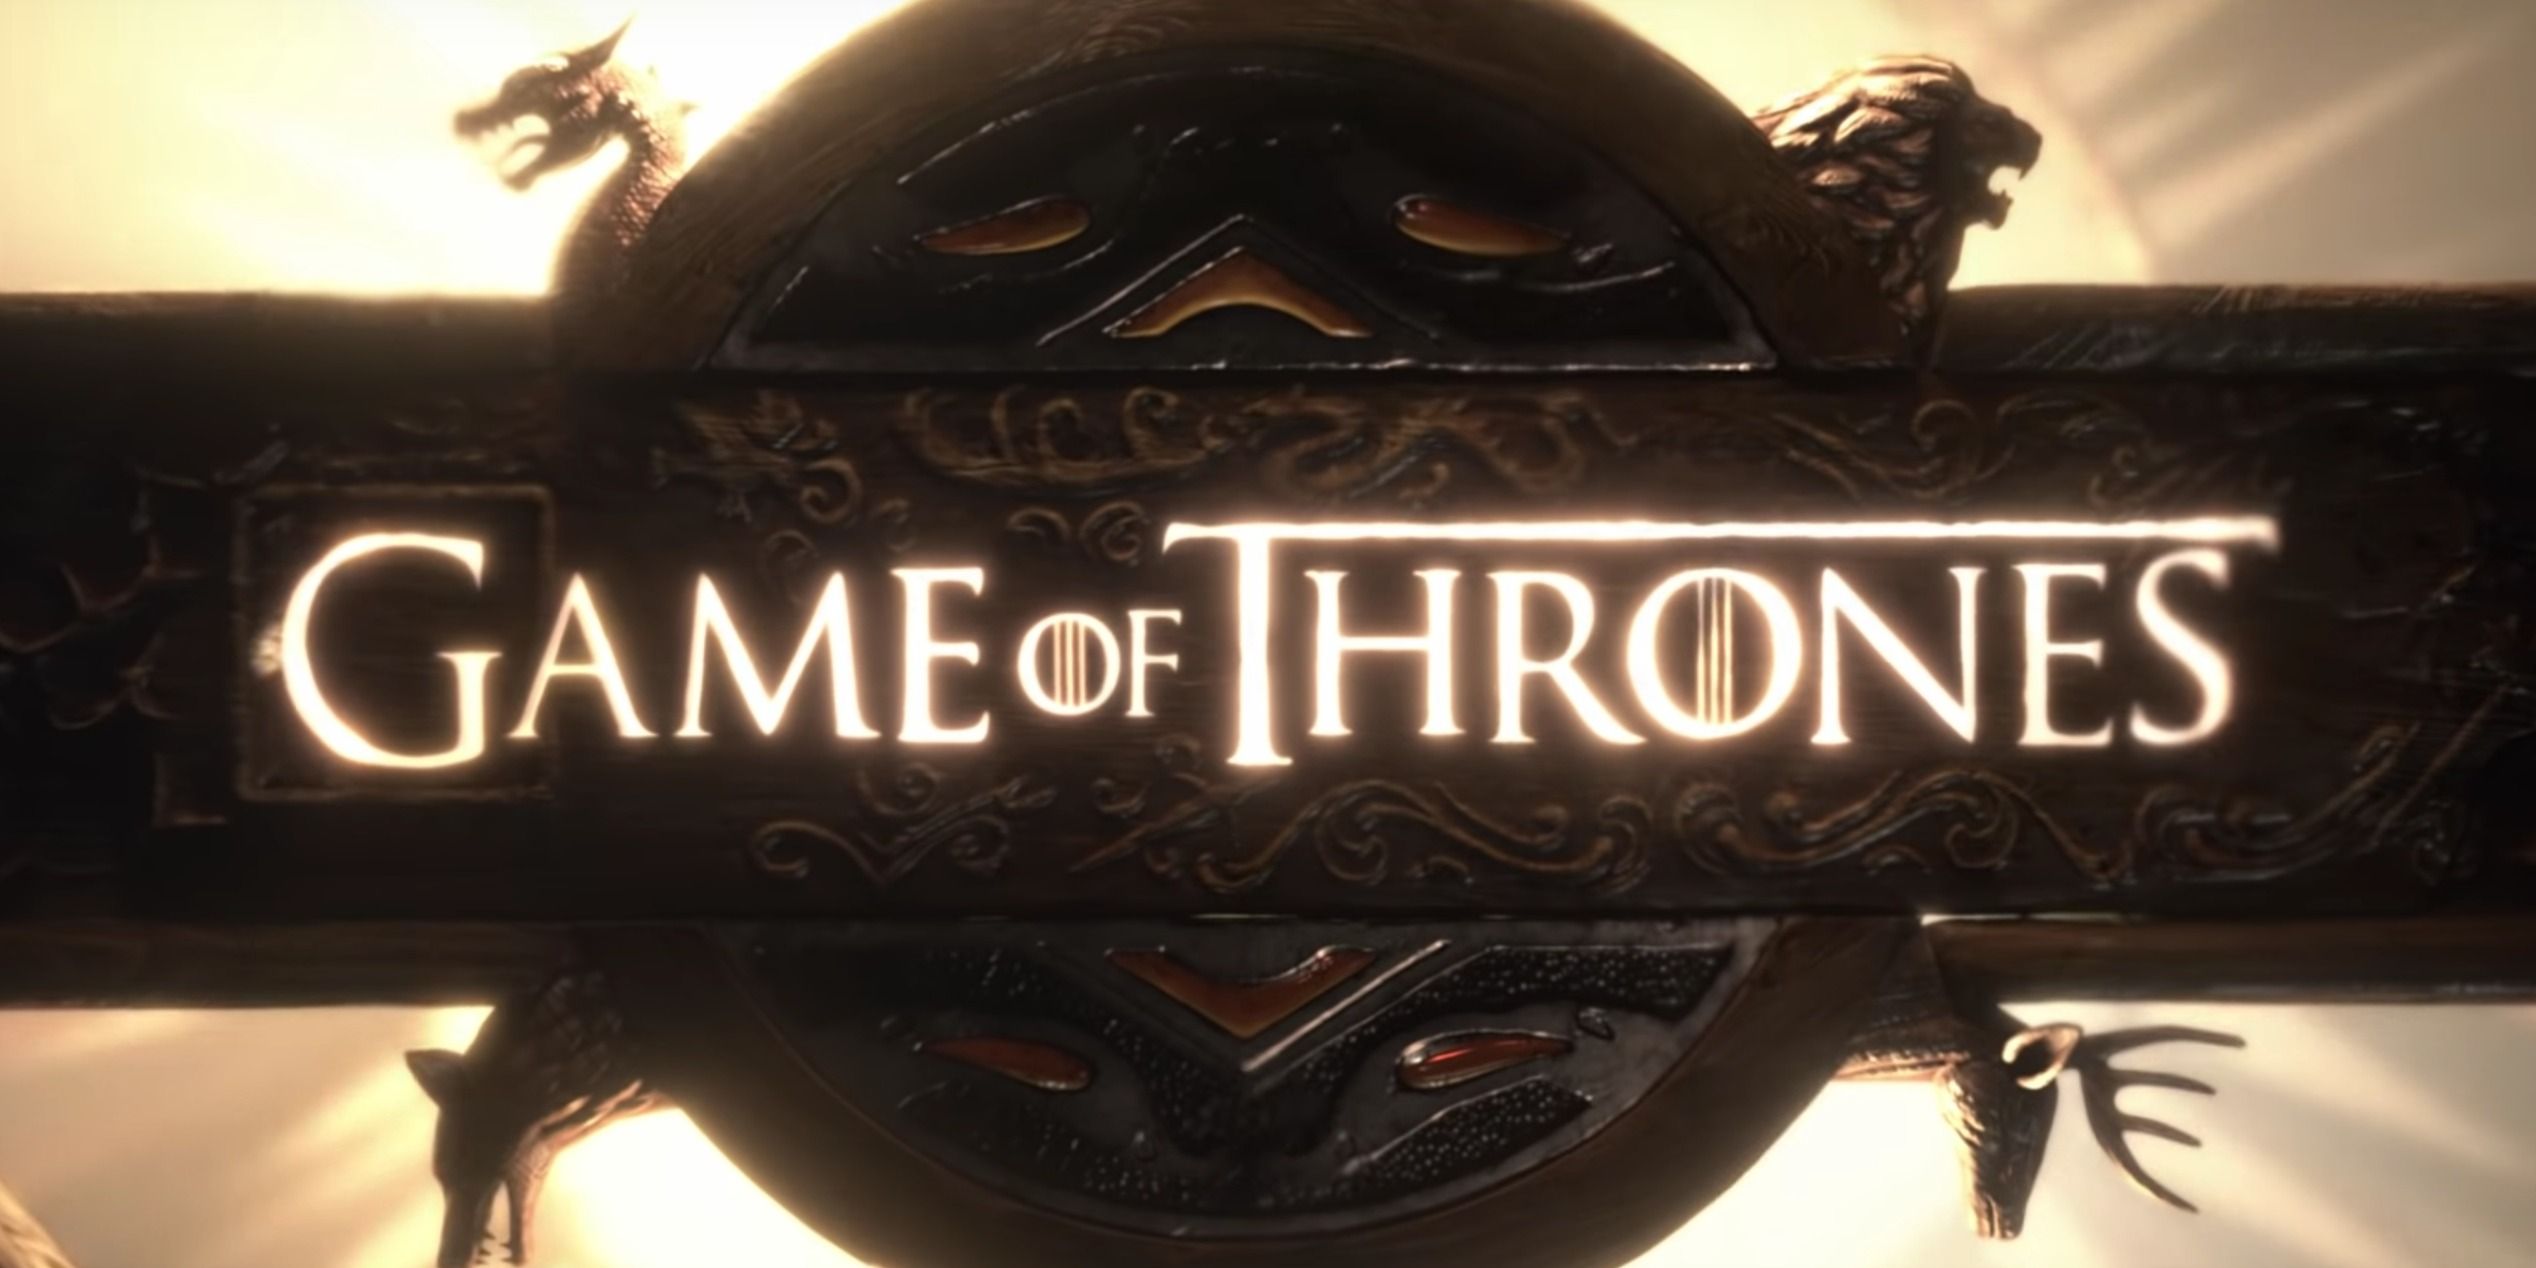 Game of Thrones Season 8 Title Card from opening sequence